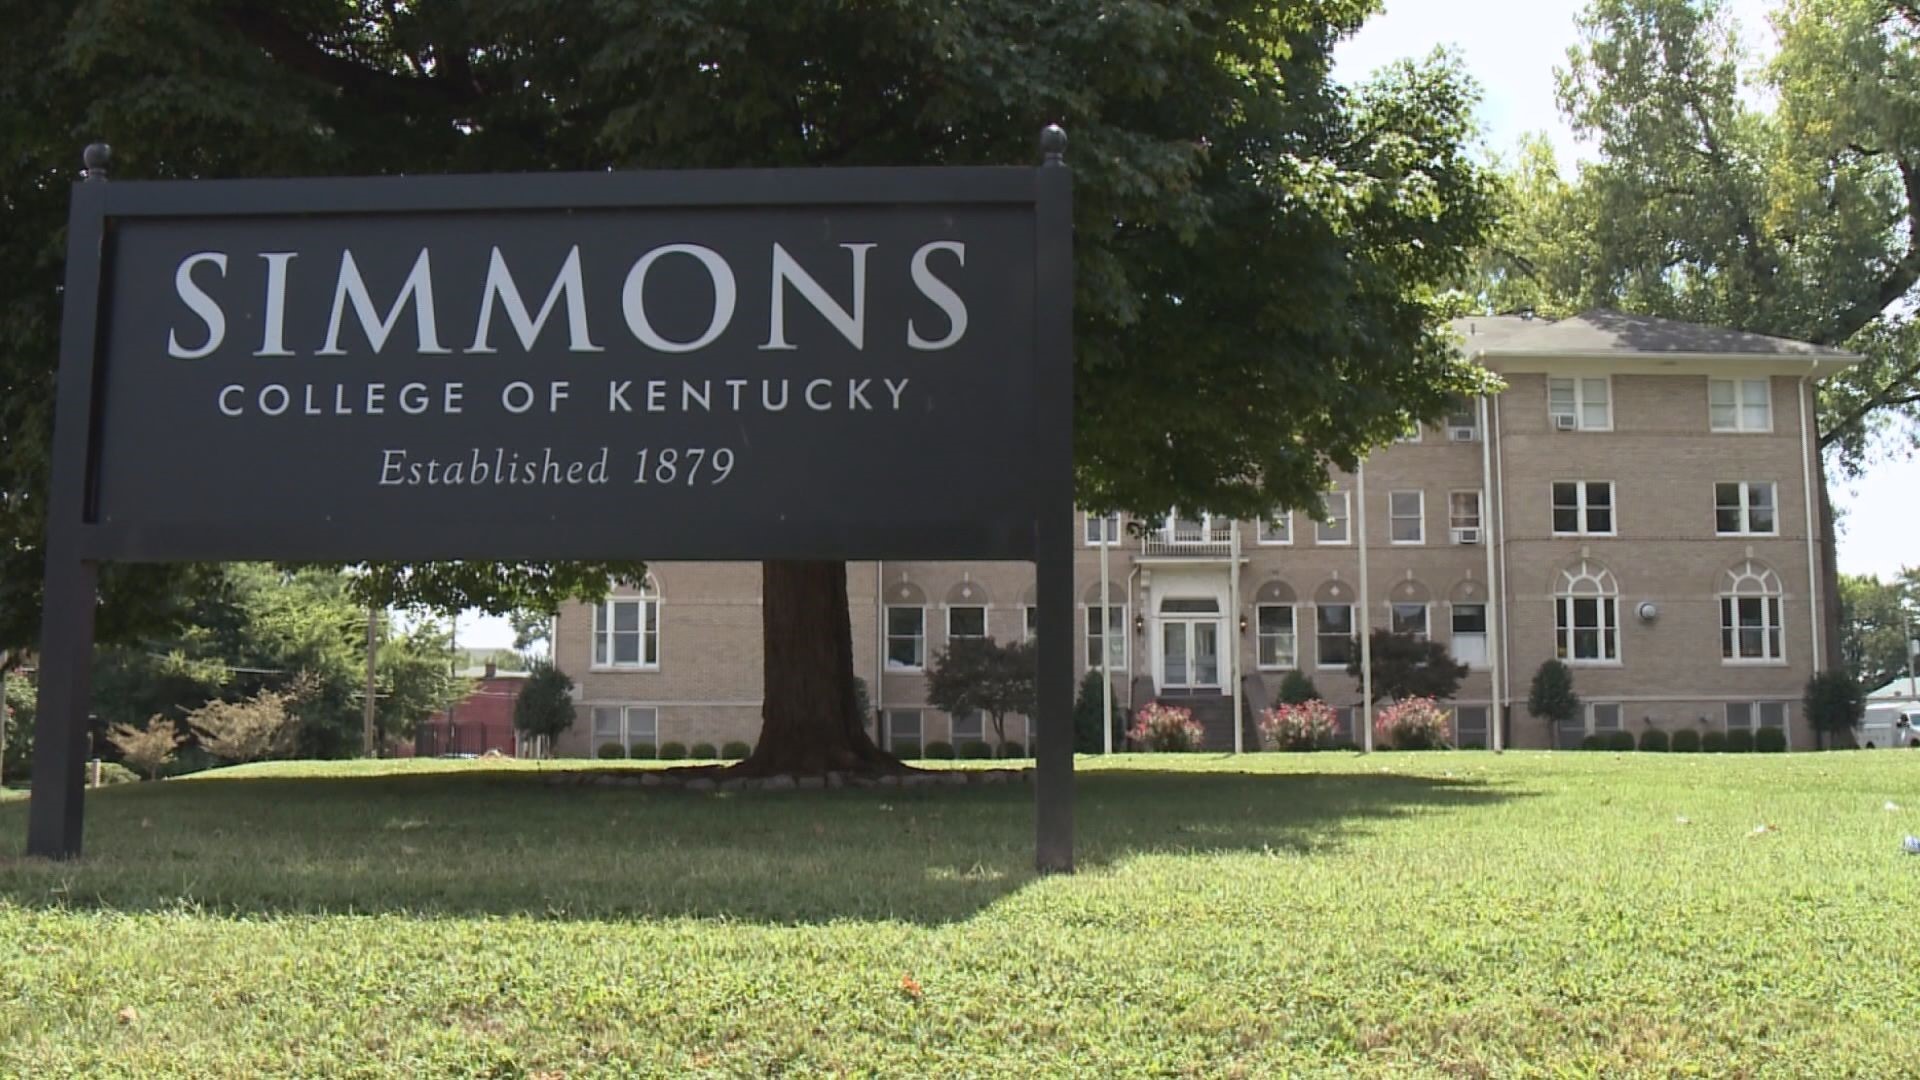 The first HBCU in Kentucky was Simmons College, which opened in 1879. Kentucky State University followed shortly after.